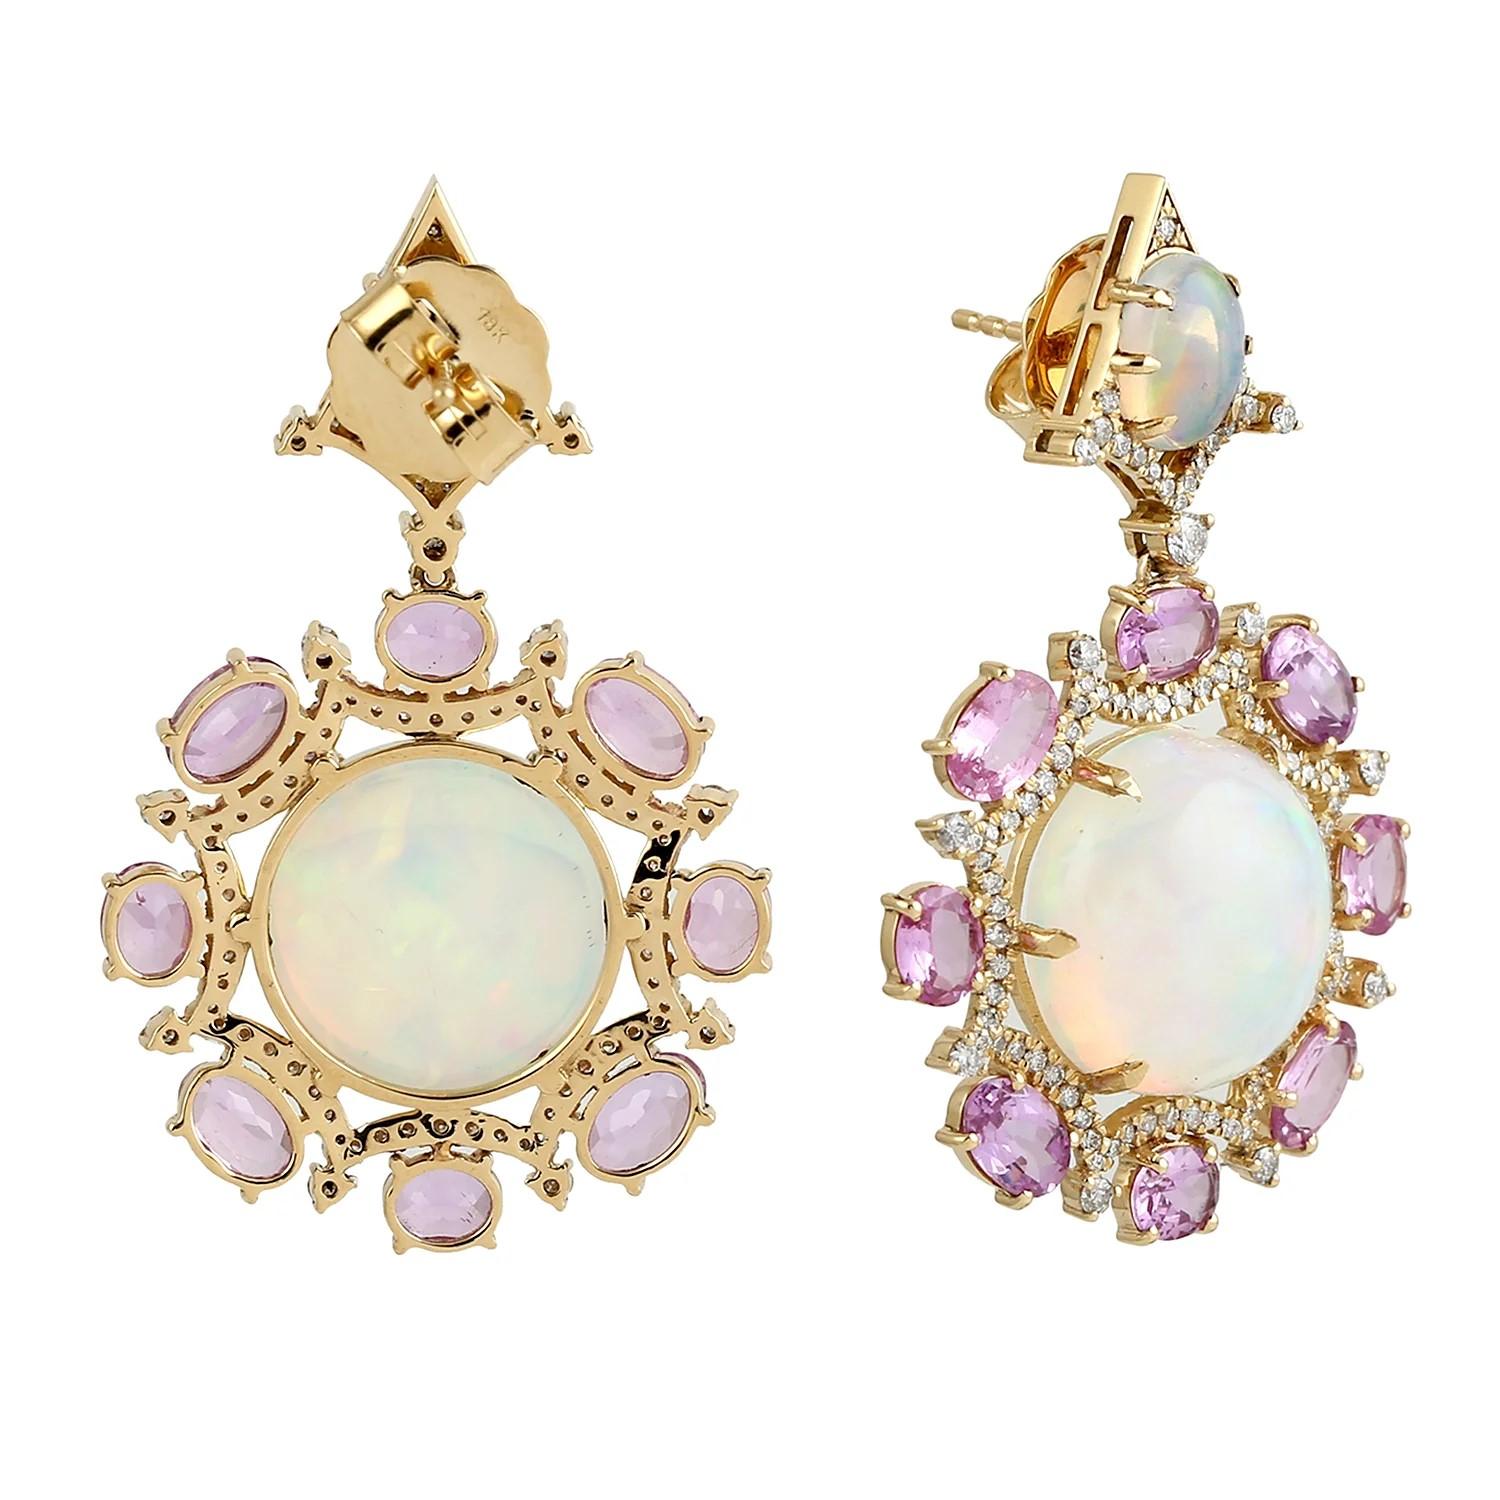 Cast in 18 karat gold, these exquisite earrings are hand set with  17.72 carats Ethiopian opal, 7.1 carats sapphire and 1.12 carats of glimmering diamonds. 

FOLLOW MEGHNA JEWELS storefront to view the latest collection & exclusive pieces. Meghna